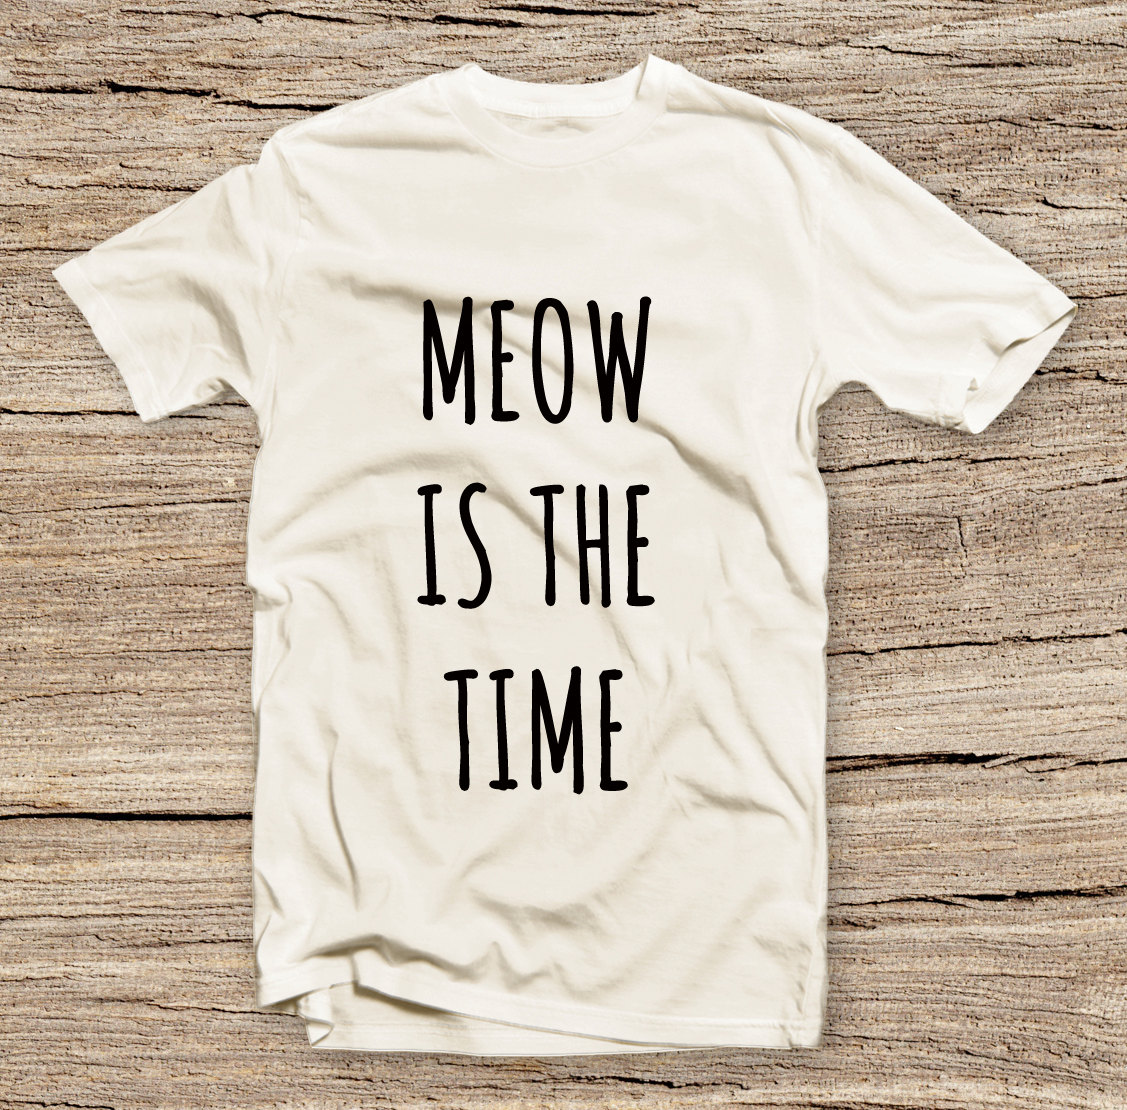 Pts-145 Meow Is The Time Style T-shirt, Unisex Tee, Fashion Printed T-shirt